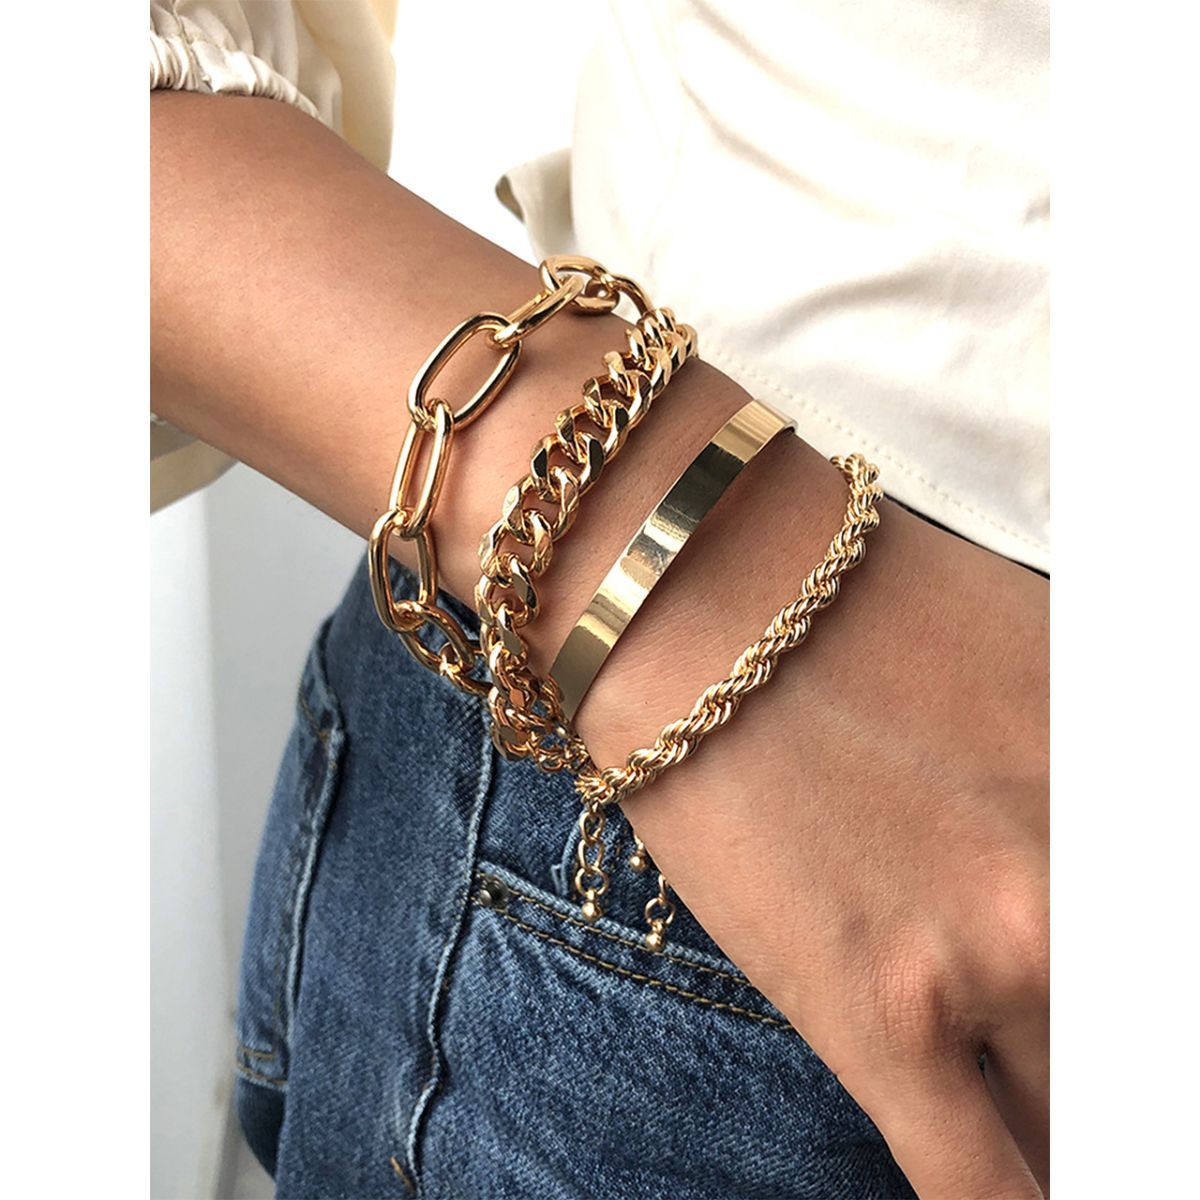 Yellow Chimes Women GoldPlated Link Bracelet Set of 4 Buy Yellow Chimes  Women GoldPlated Link Bracelet Set of 4 Online at Best Price in India   Nykaa